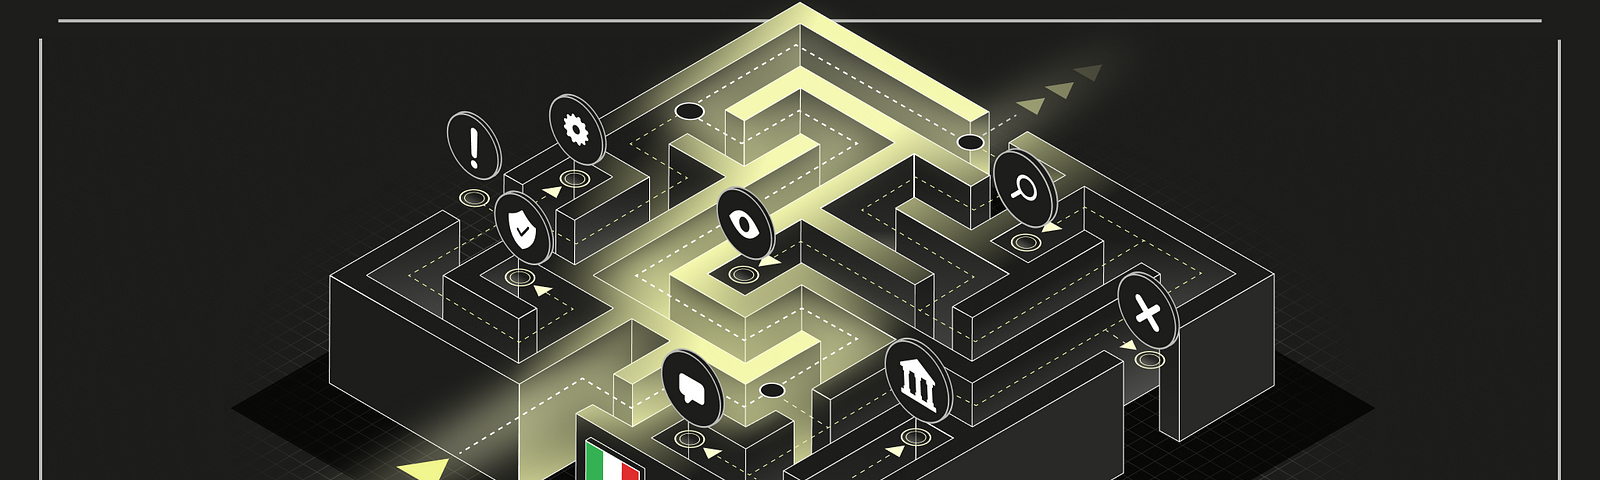 A dark grey illustration depicting a labyrinth. 2 yellow arrows point to the entrance and the path through is highlighted in yellow. To the right of the entrance we see an Italian flag, and there are several markers that hover above the mazes to indicate locations and different aspects of the Qonto product, for example a building icon, an exclamation point, a chat bubble, etc.